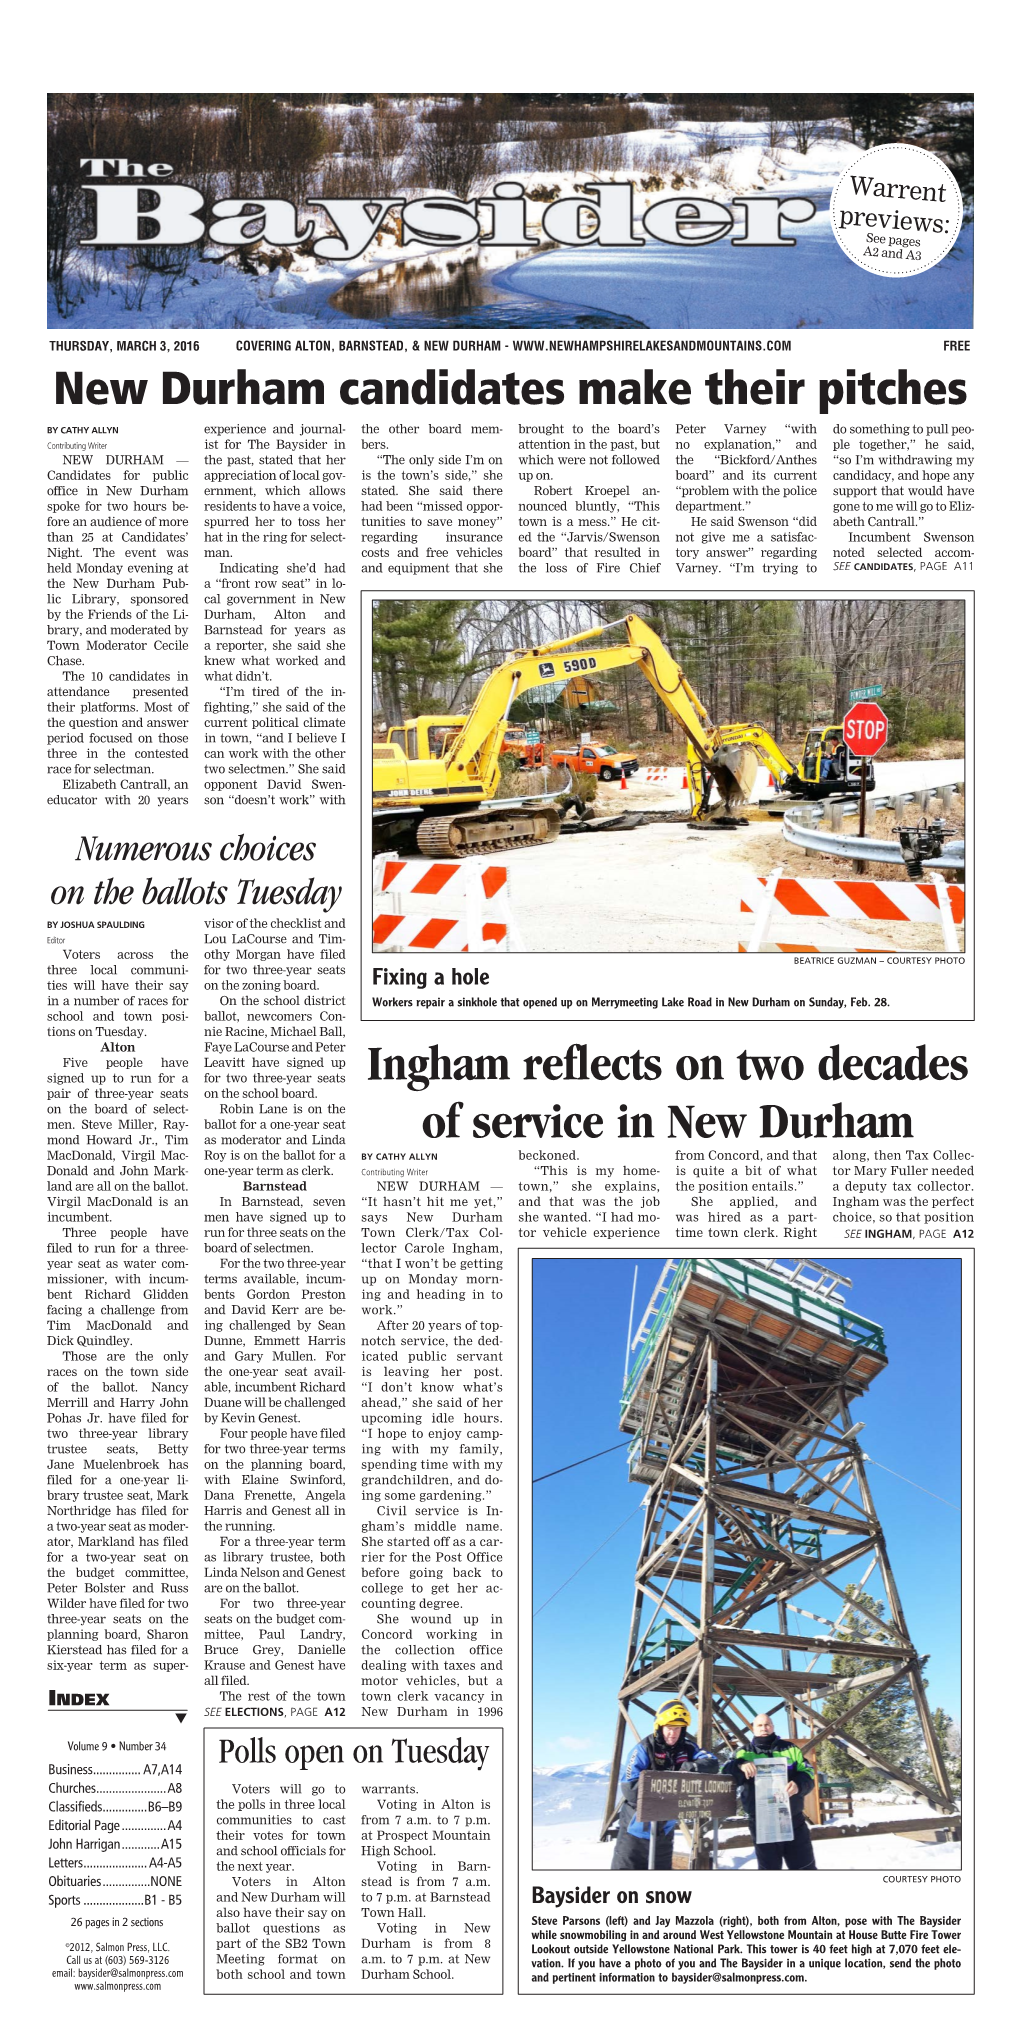 Ingham Reflects on Two Decades of Service in New Durham